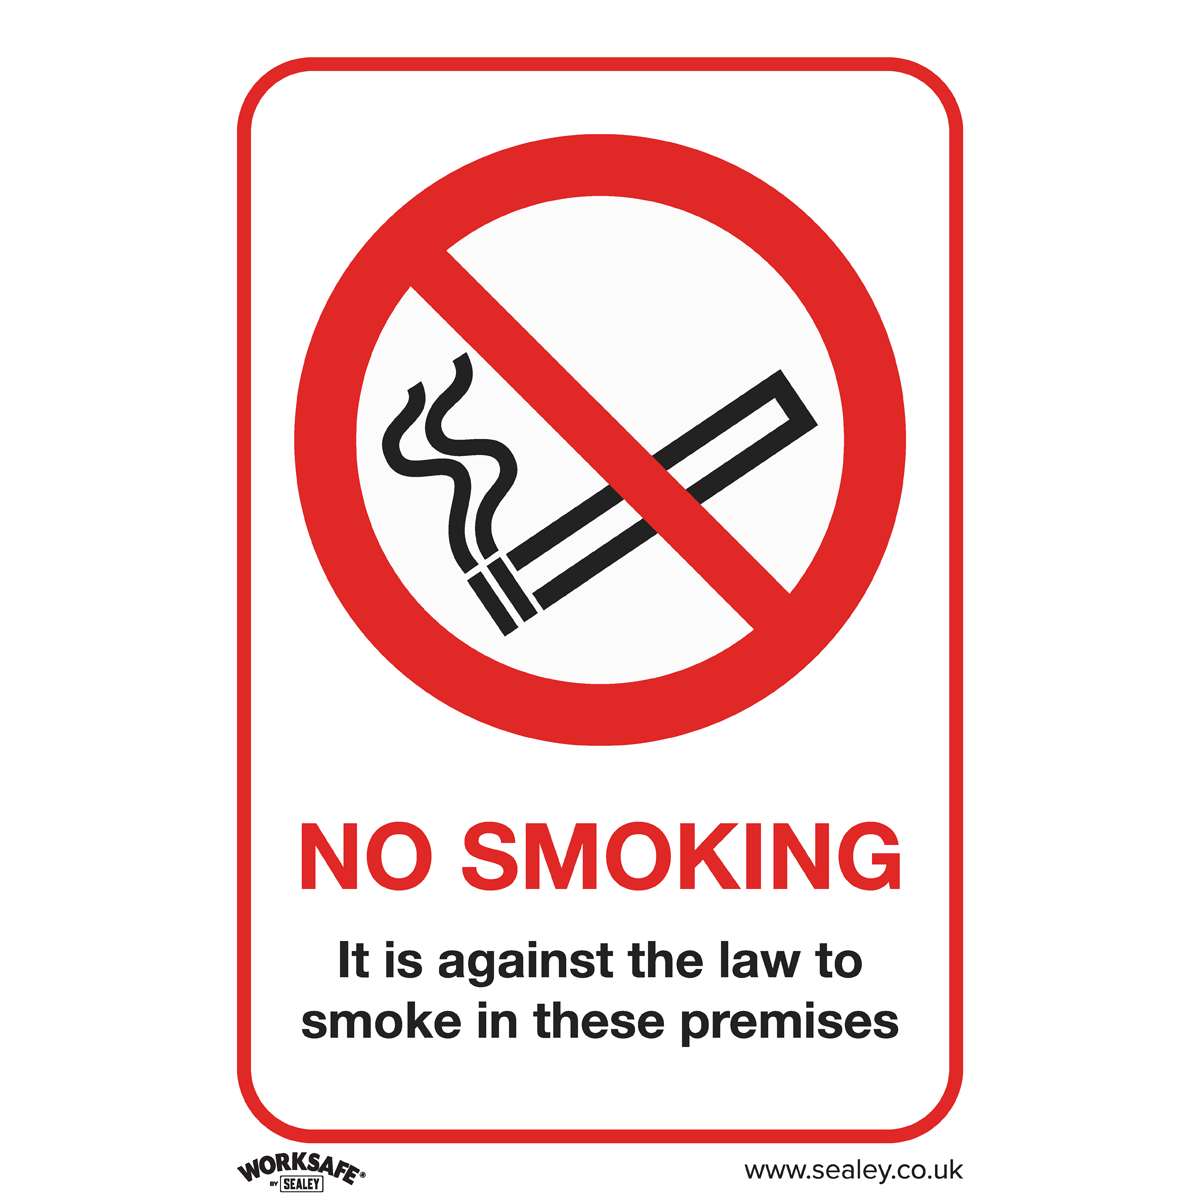 Sealey Prohibition Safety Sign - No Smoking (On Premises) - Rigid Plastic - Pack of 10